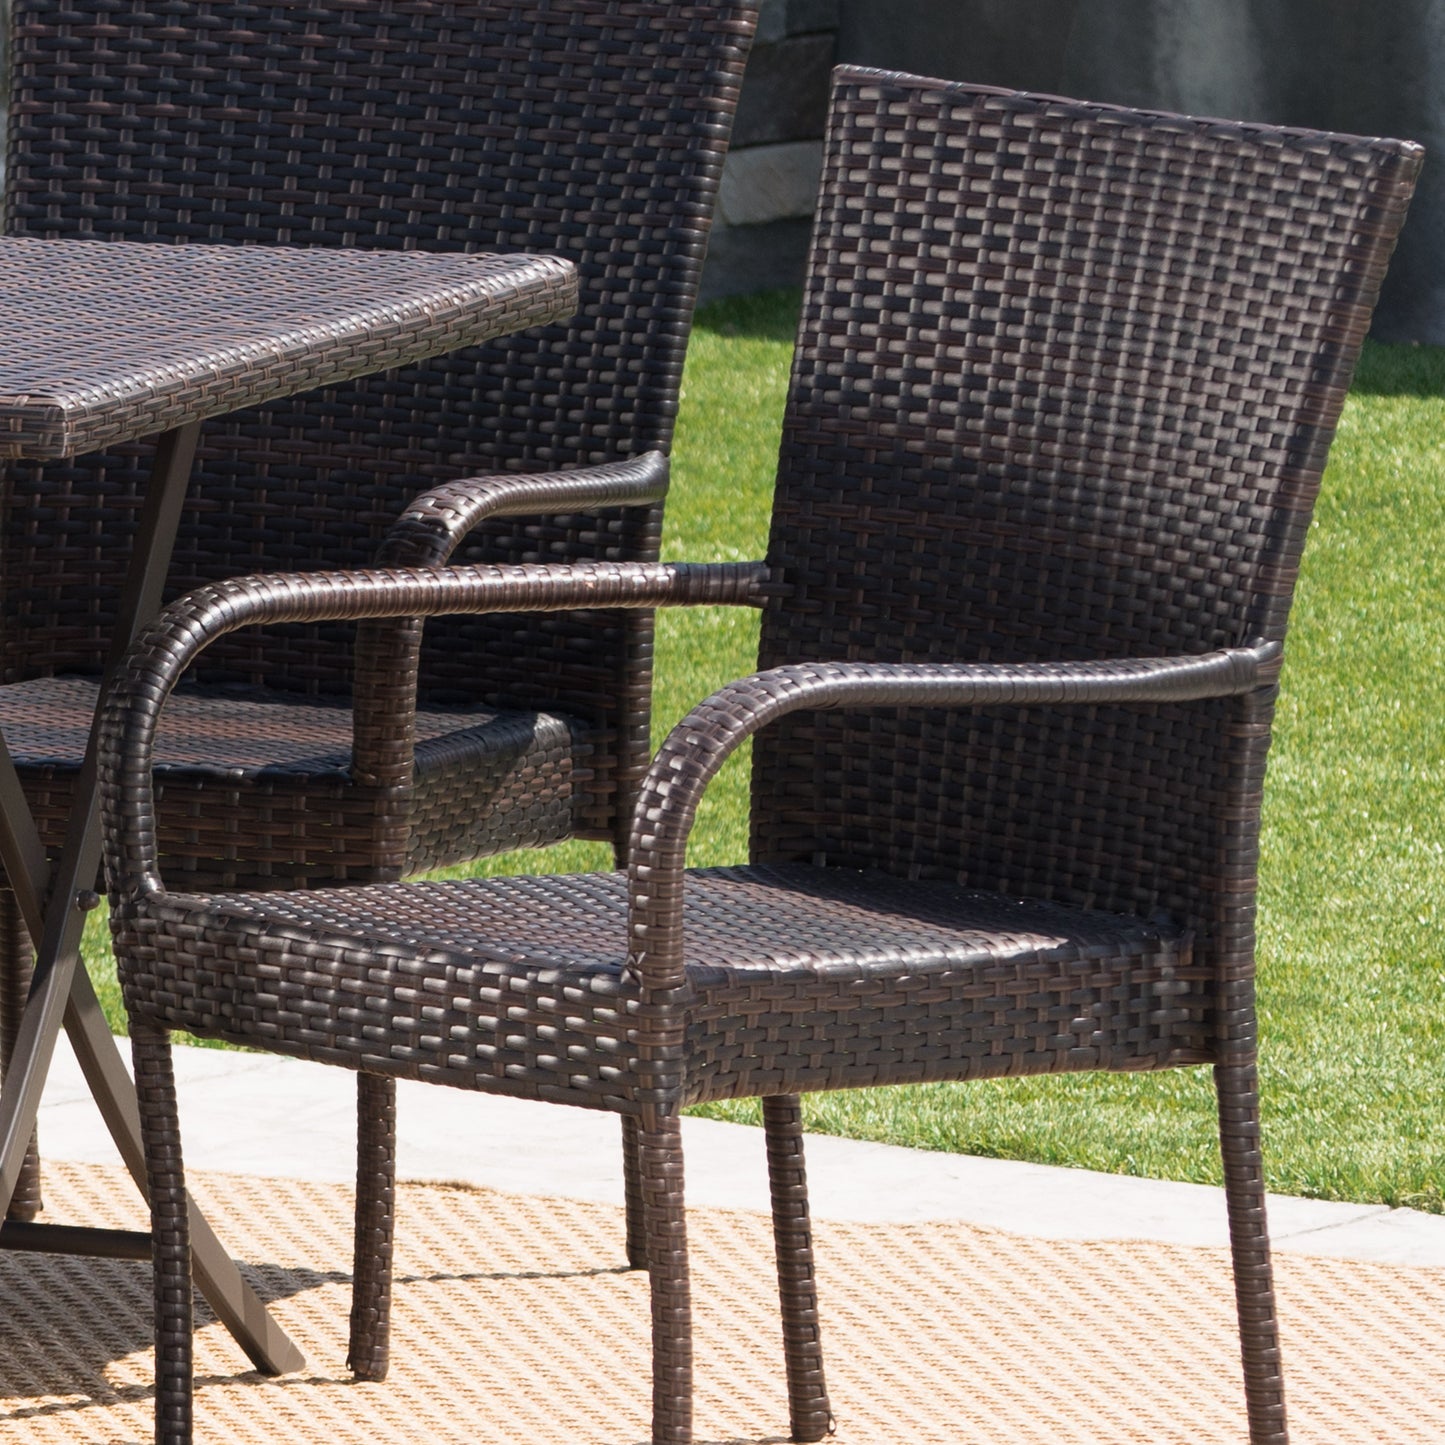 Nina Outdoor 7-Piece Multi-Brown Wicker Dining Set with Foldable Table